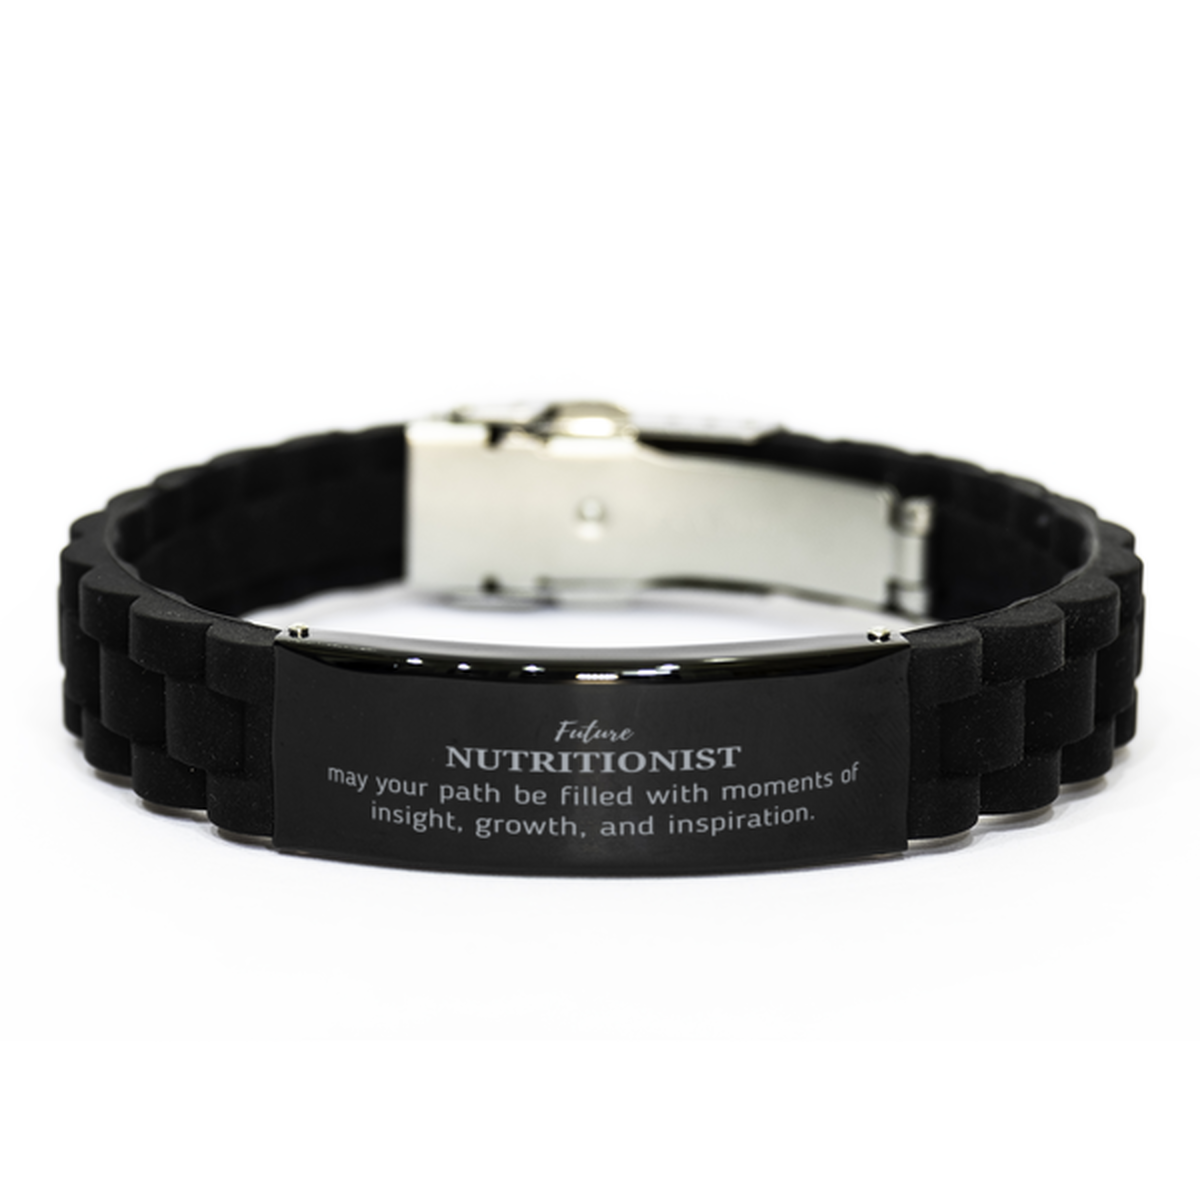 Future Nutritionist Gifts, May your path be filled with moments of insight, Graduation Gifts for New Nutritionist, Christmas Unique Black Glidelock Clasp Bracelet For Men, Women, Friends